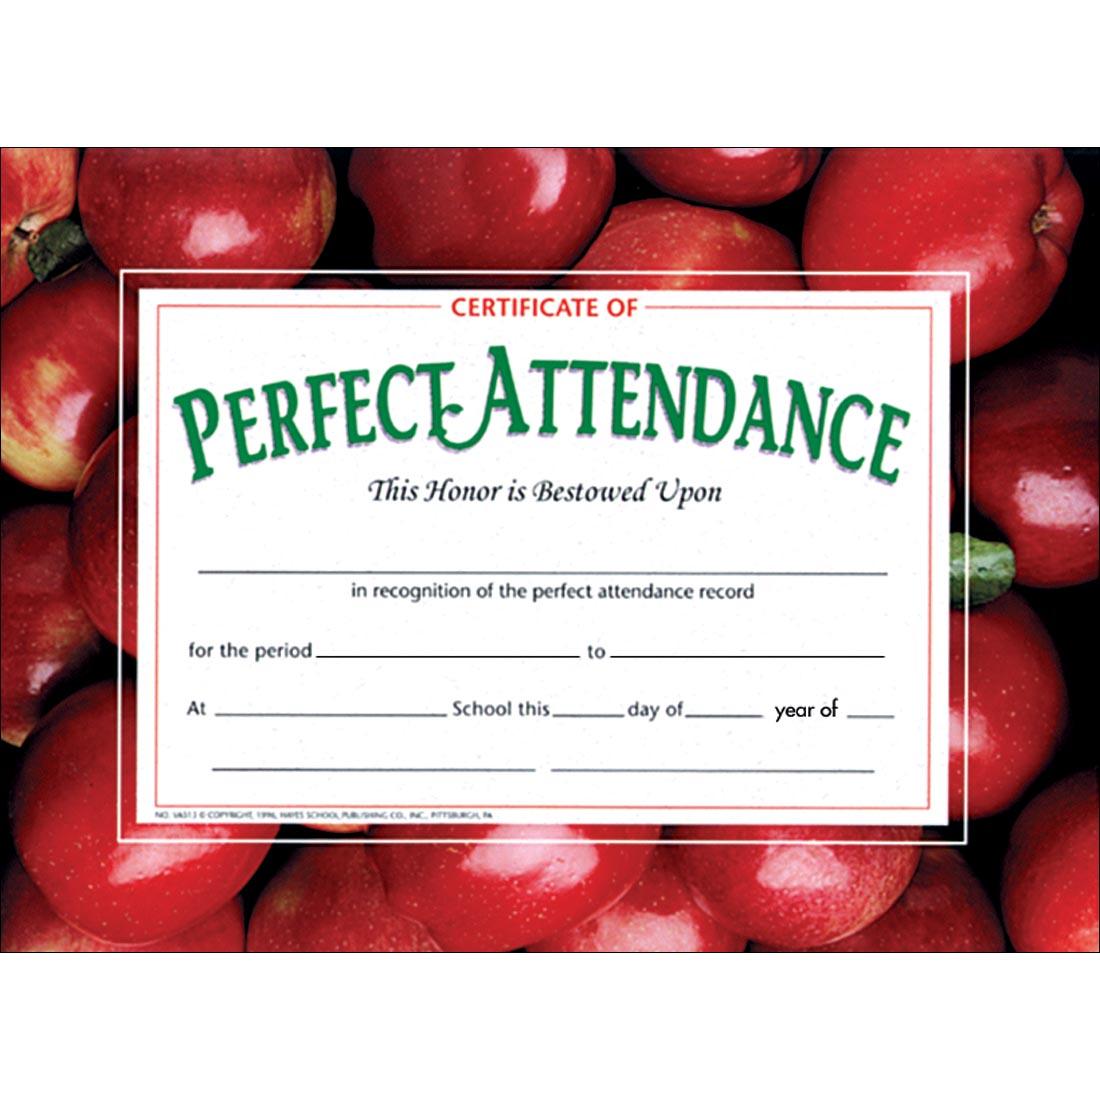 Blank Perfect Attendance Certificate with red apples around the border